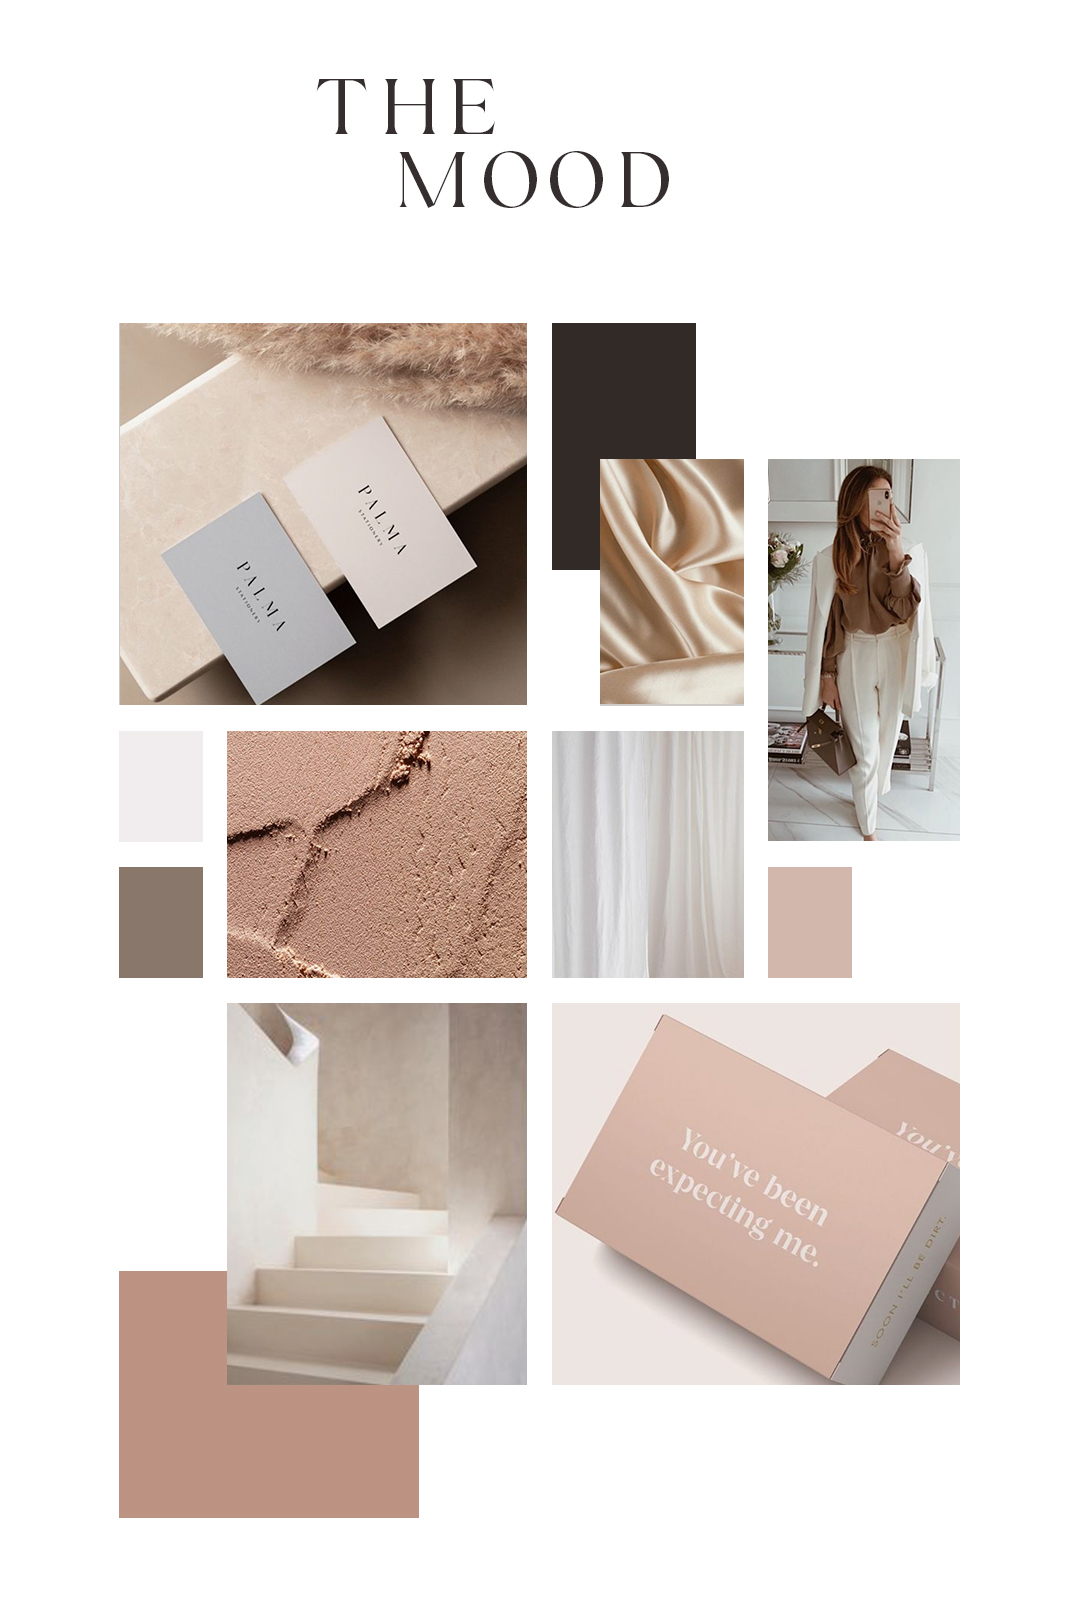 Demi Bang's personal rebranding, Mood Guide by Rouse Creative.